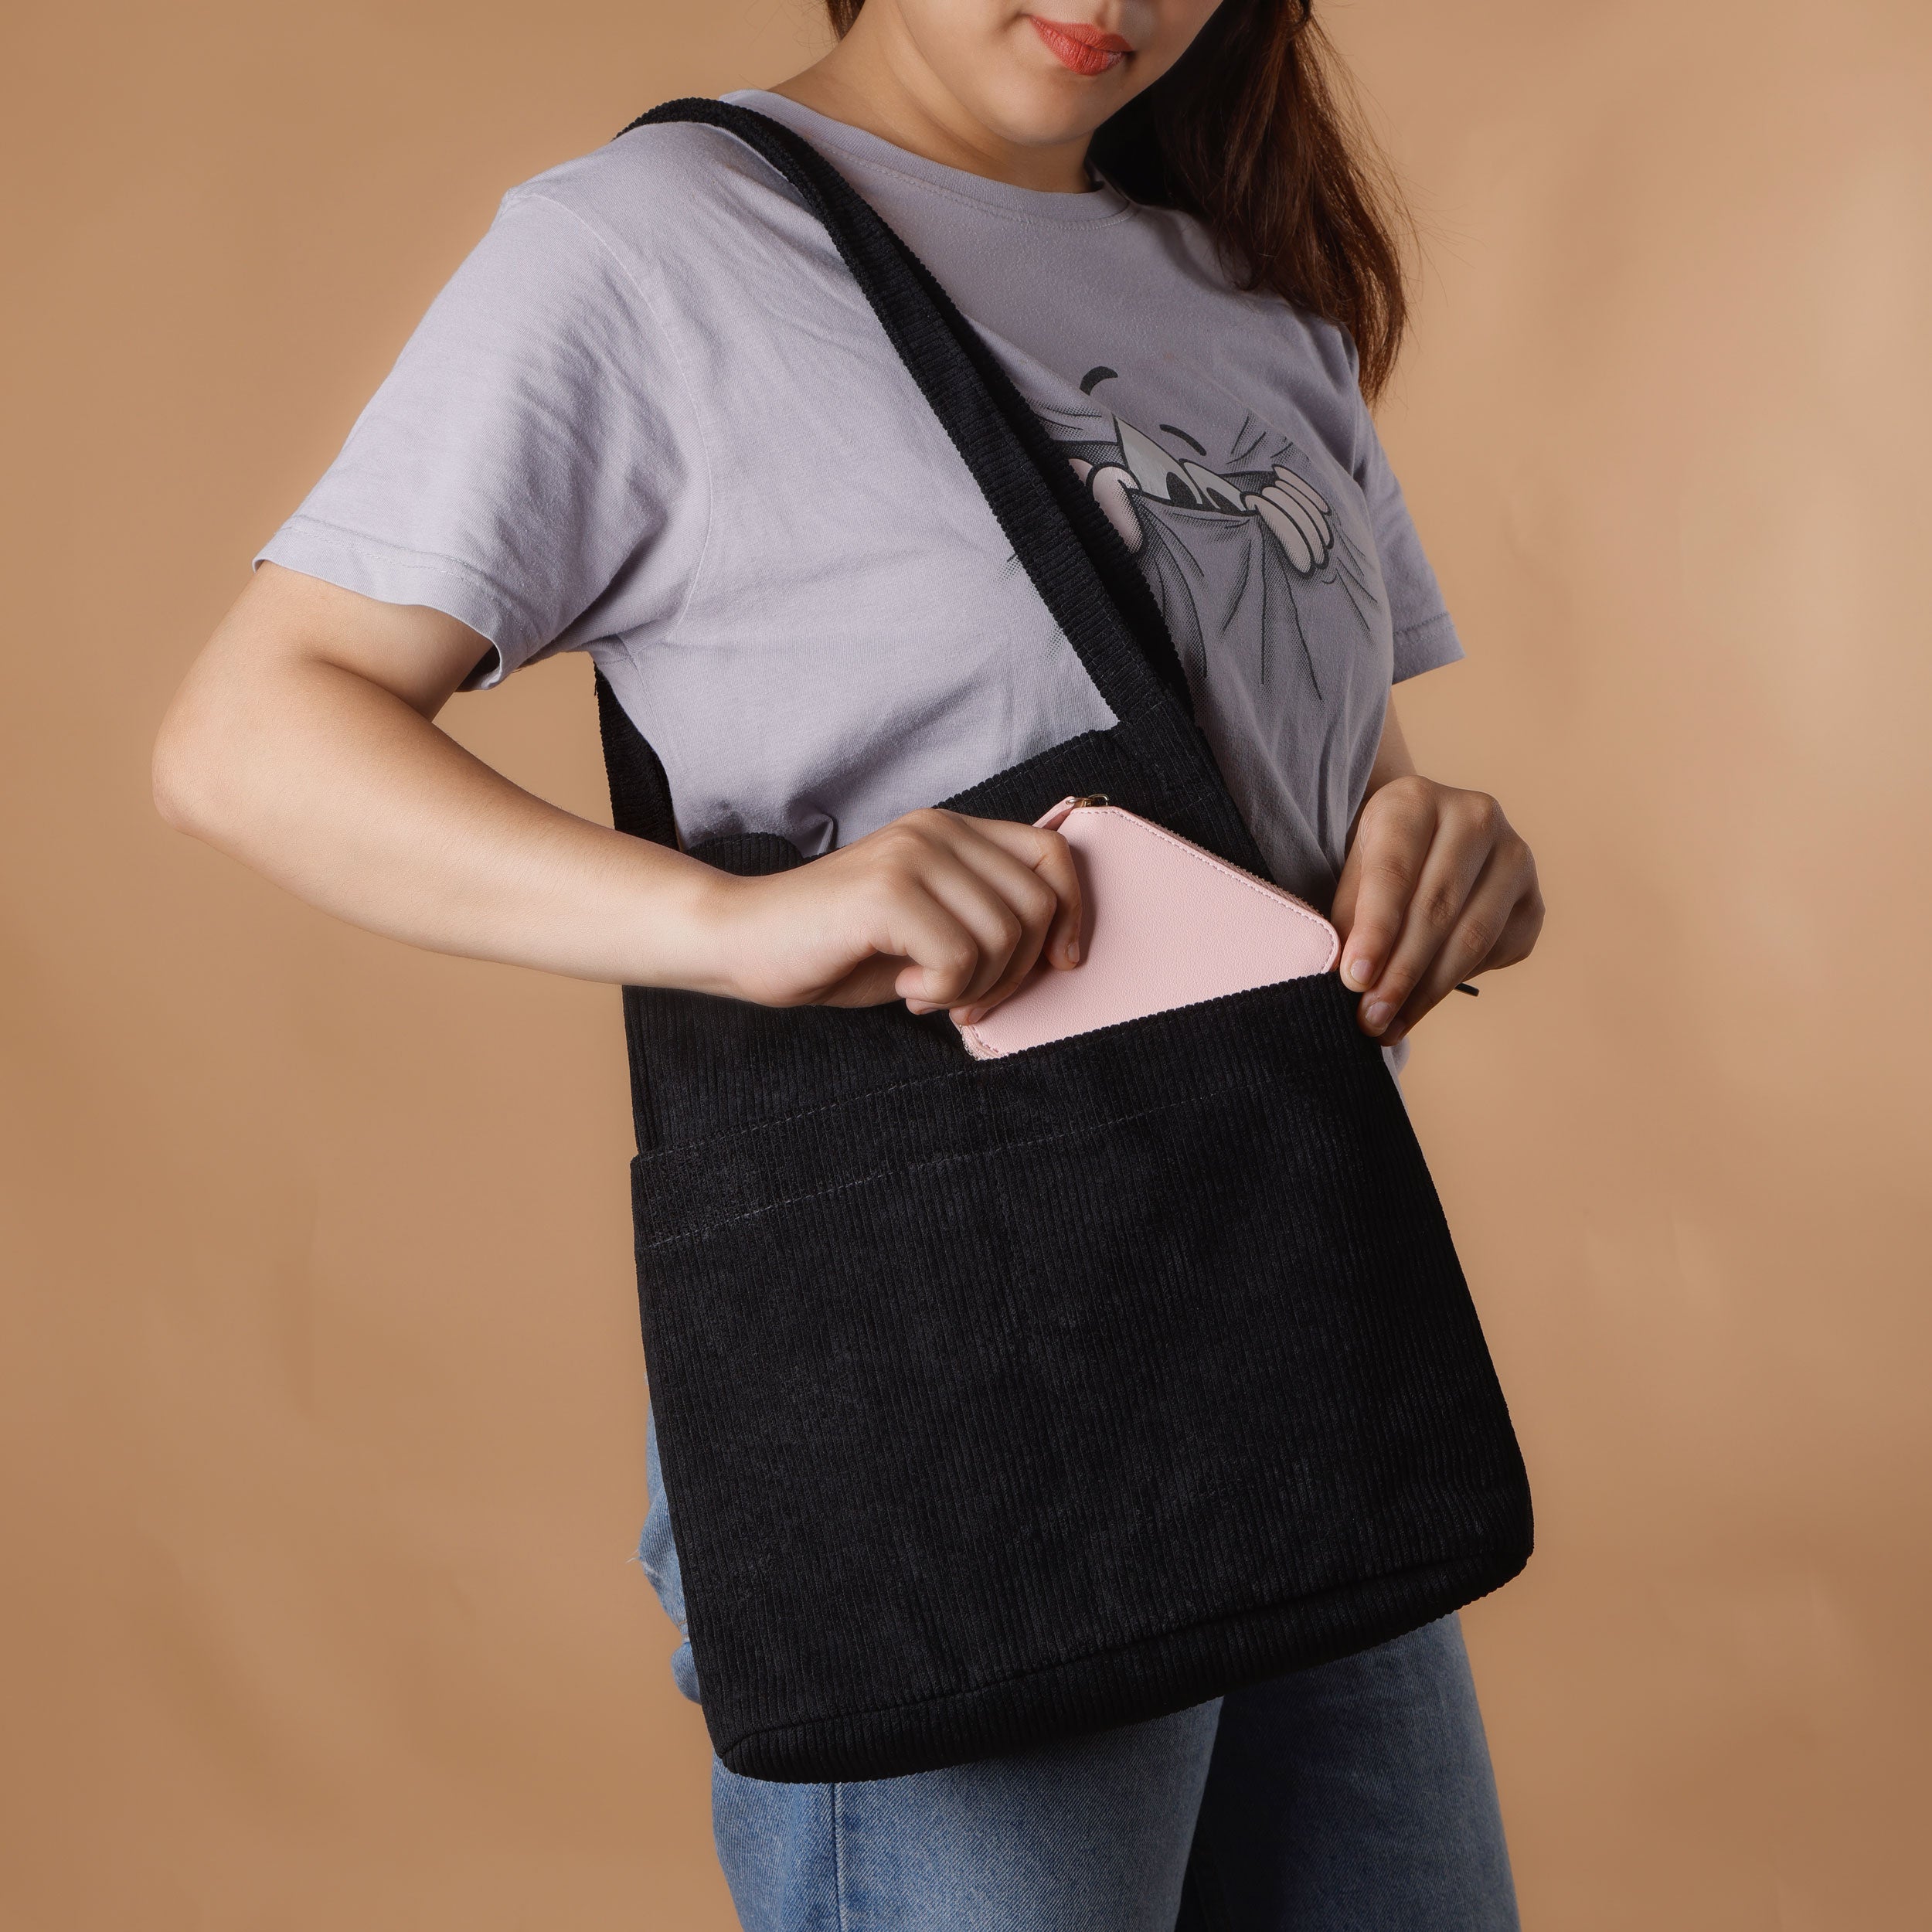 Branded Tote Bags for Women for College, Work and Daily Use – HK